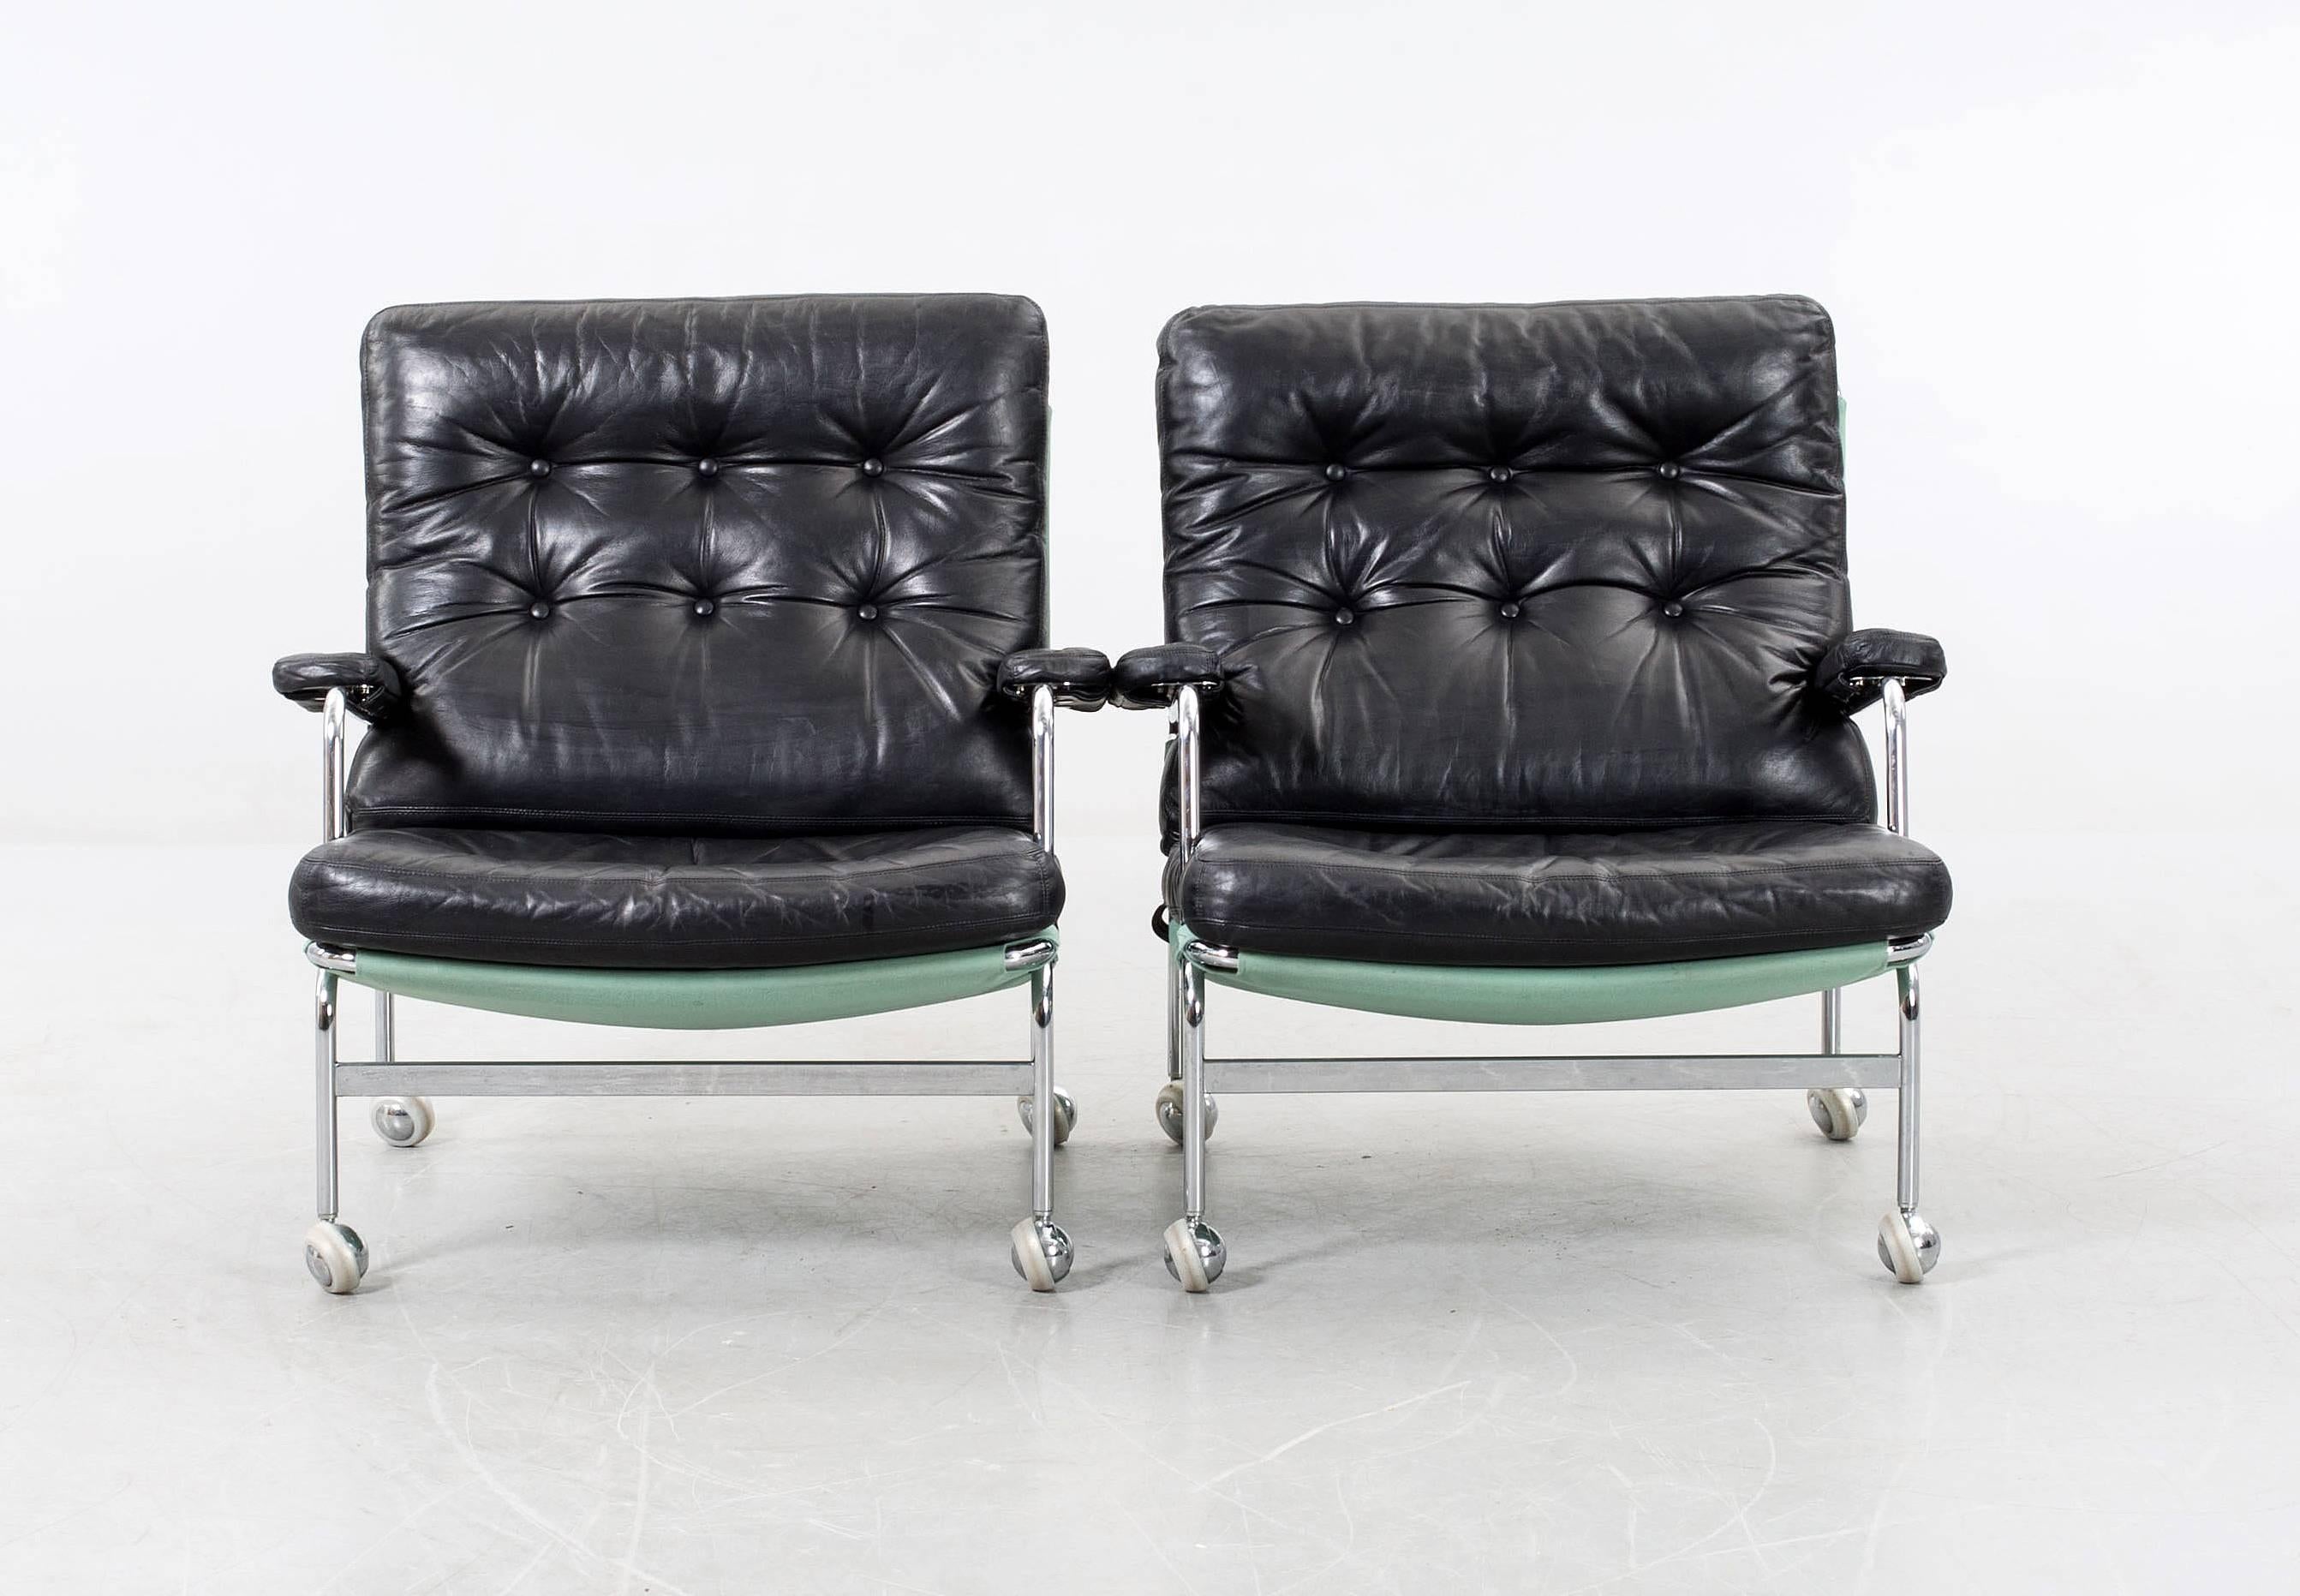 Pair of easy armchairs model Karin designed by Bruno Mathsson. Produced by DUX in Sweden. Frame in chrome steel and black leather upholstered.